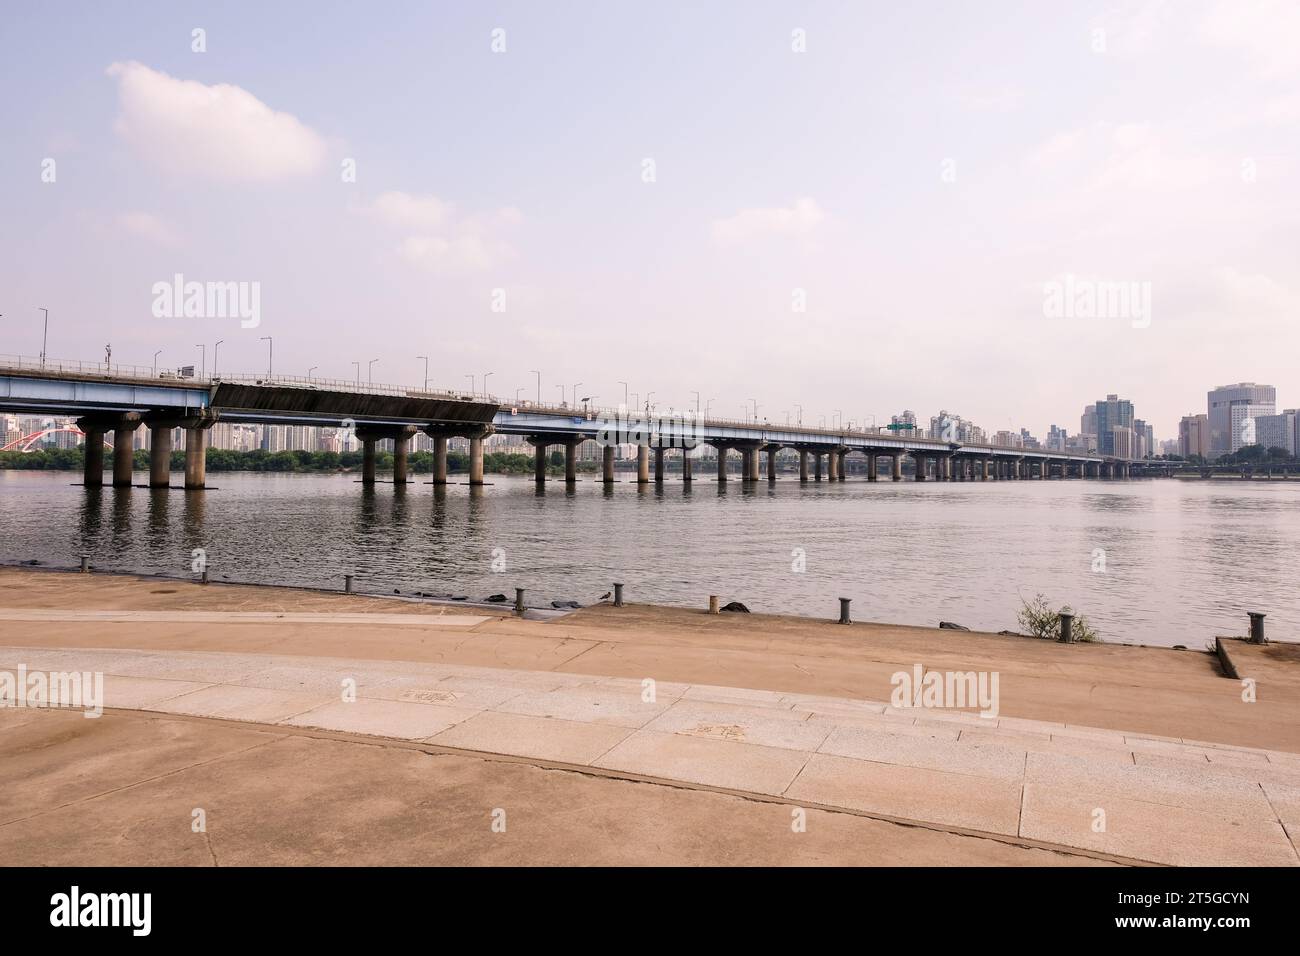 Seoul, South Korea - 11 July 2022: View of river at Yeouido Hangang Park, one of the parks next to Han river Stock Photo